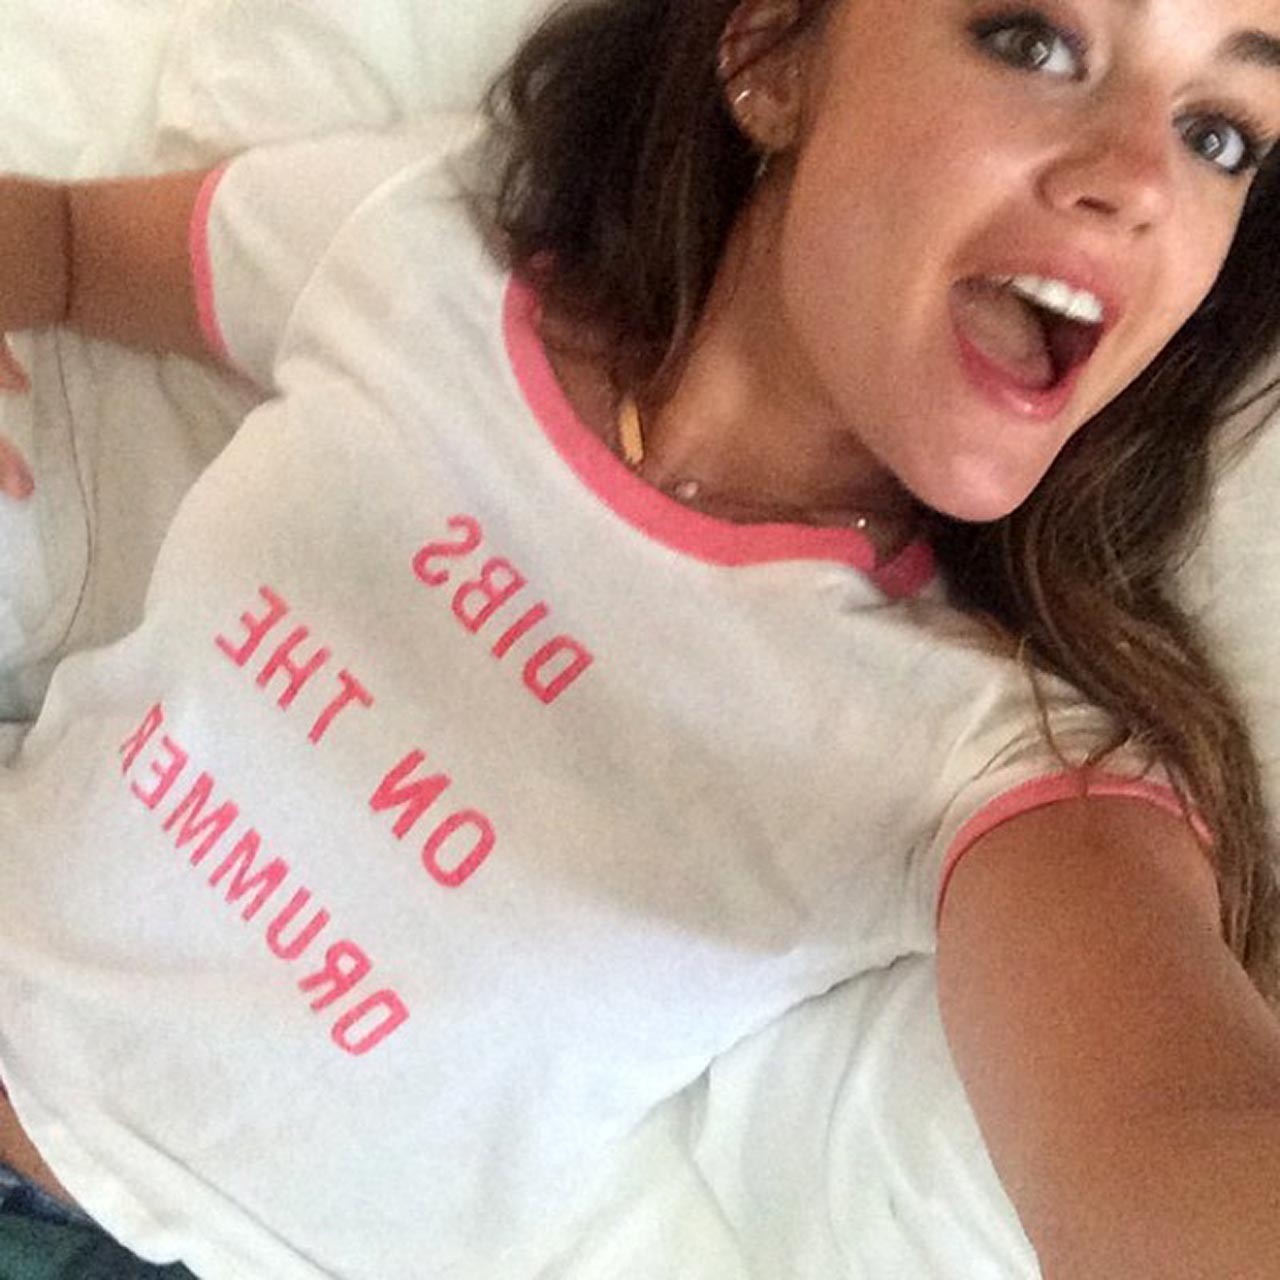 Lucy Hale Leaked Nudes & Private Selfies â€” Topless 'Pretty ...